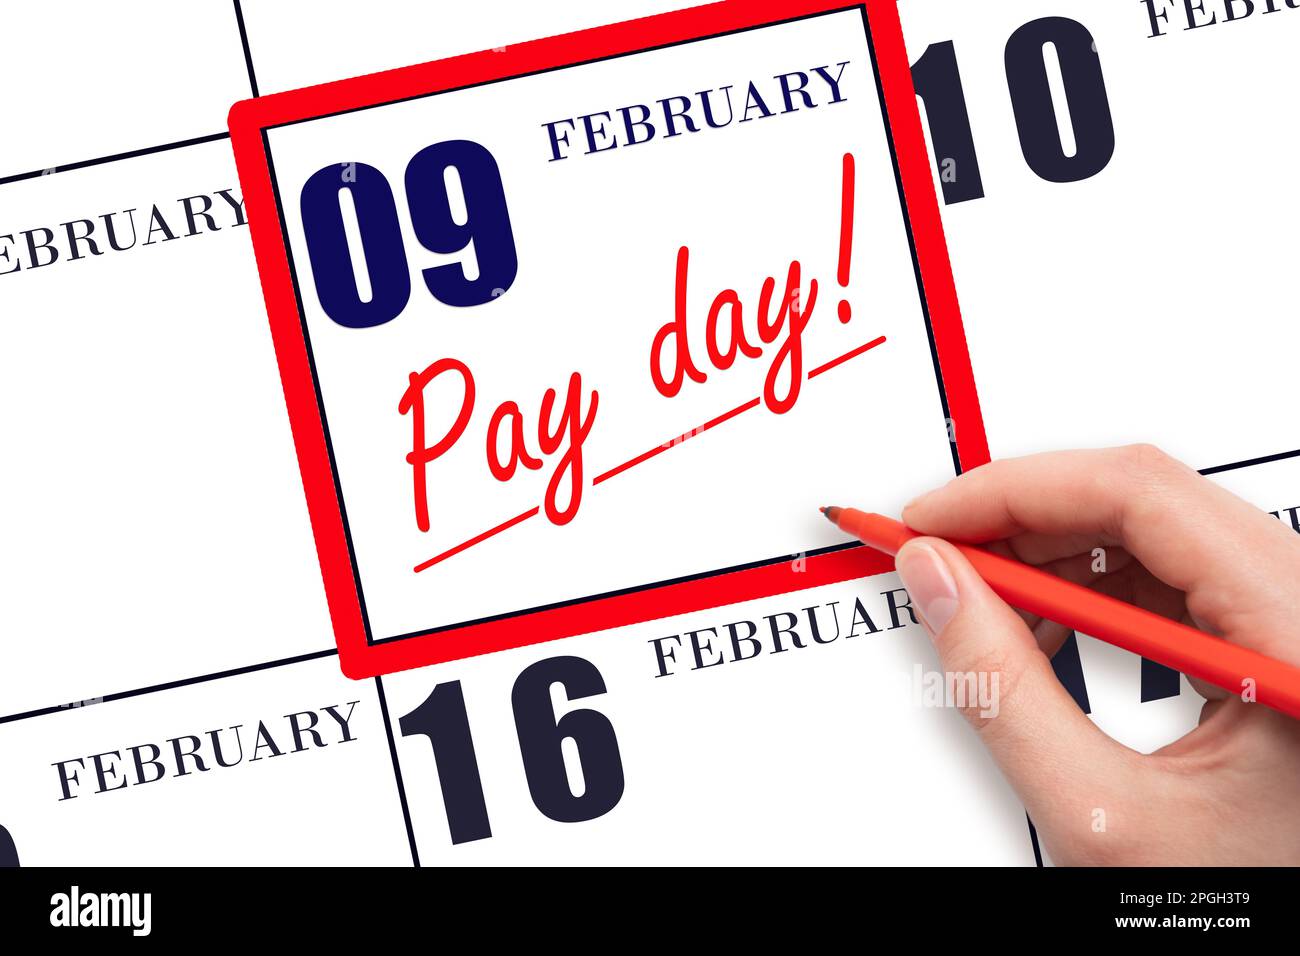 9th day of February. Hand writing text PAY DATE on calendar date February 9 and underline it. Payment due date. Reminder concept of payment. Winter mo Stock Photo